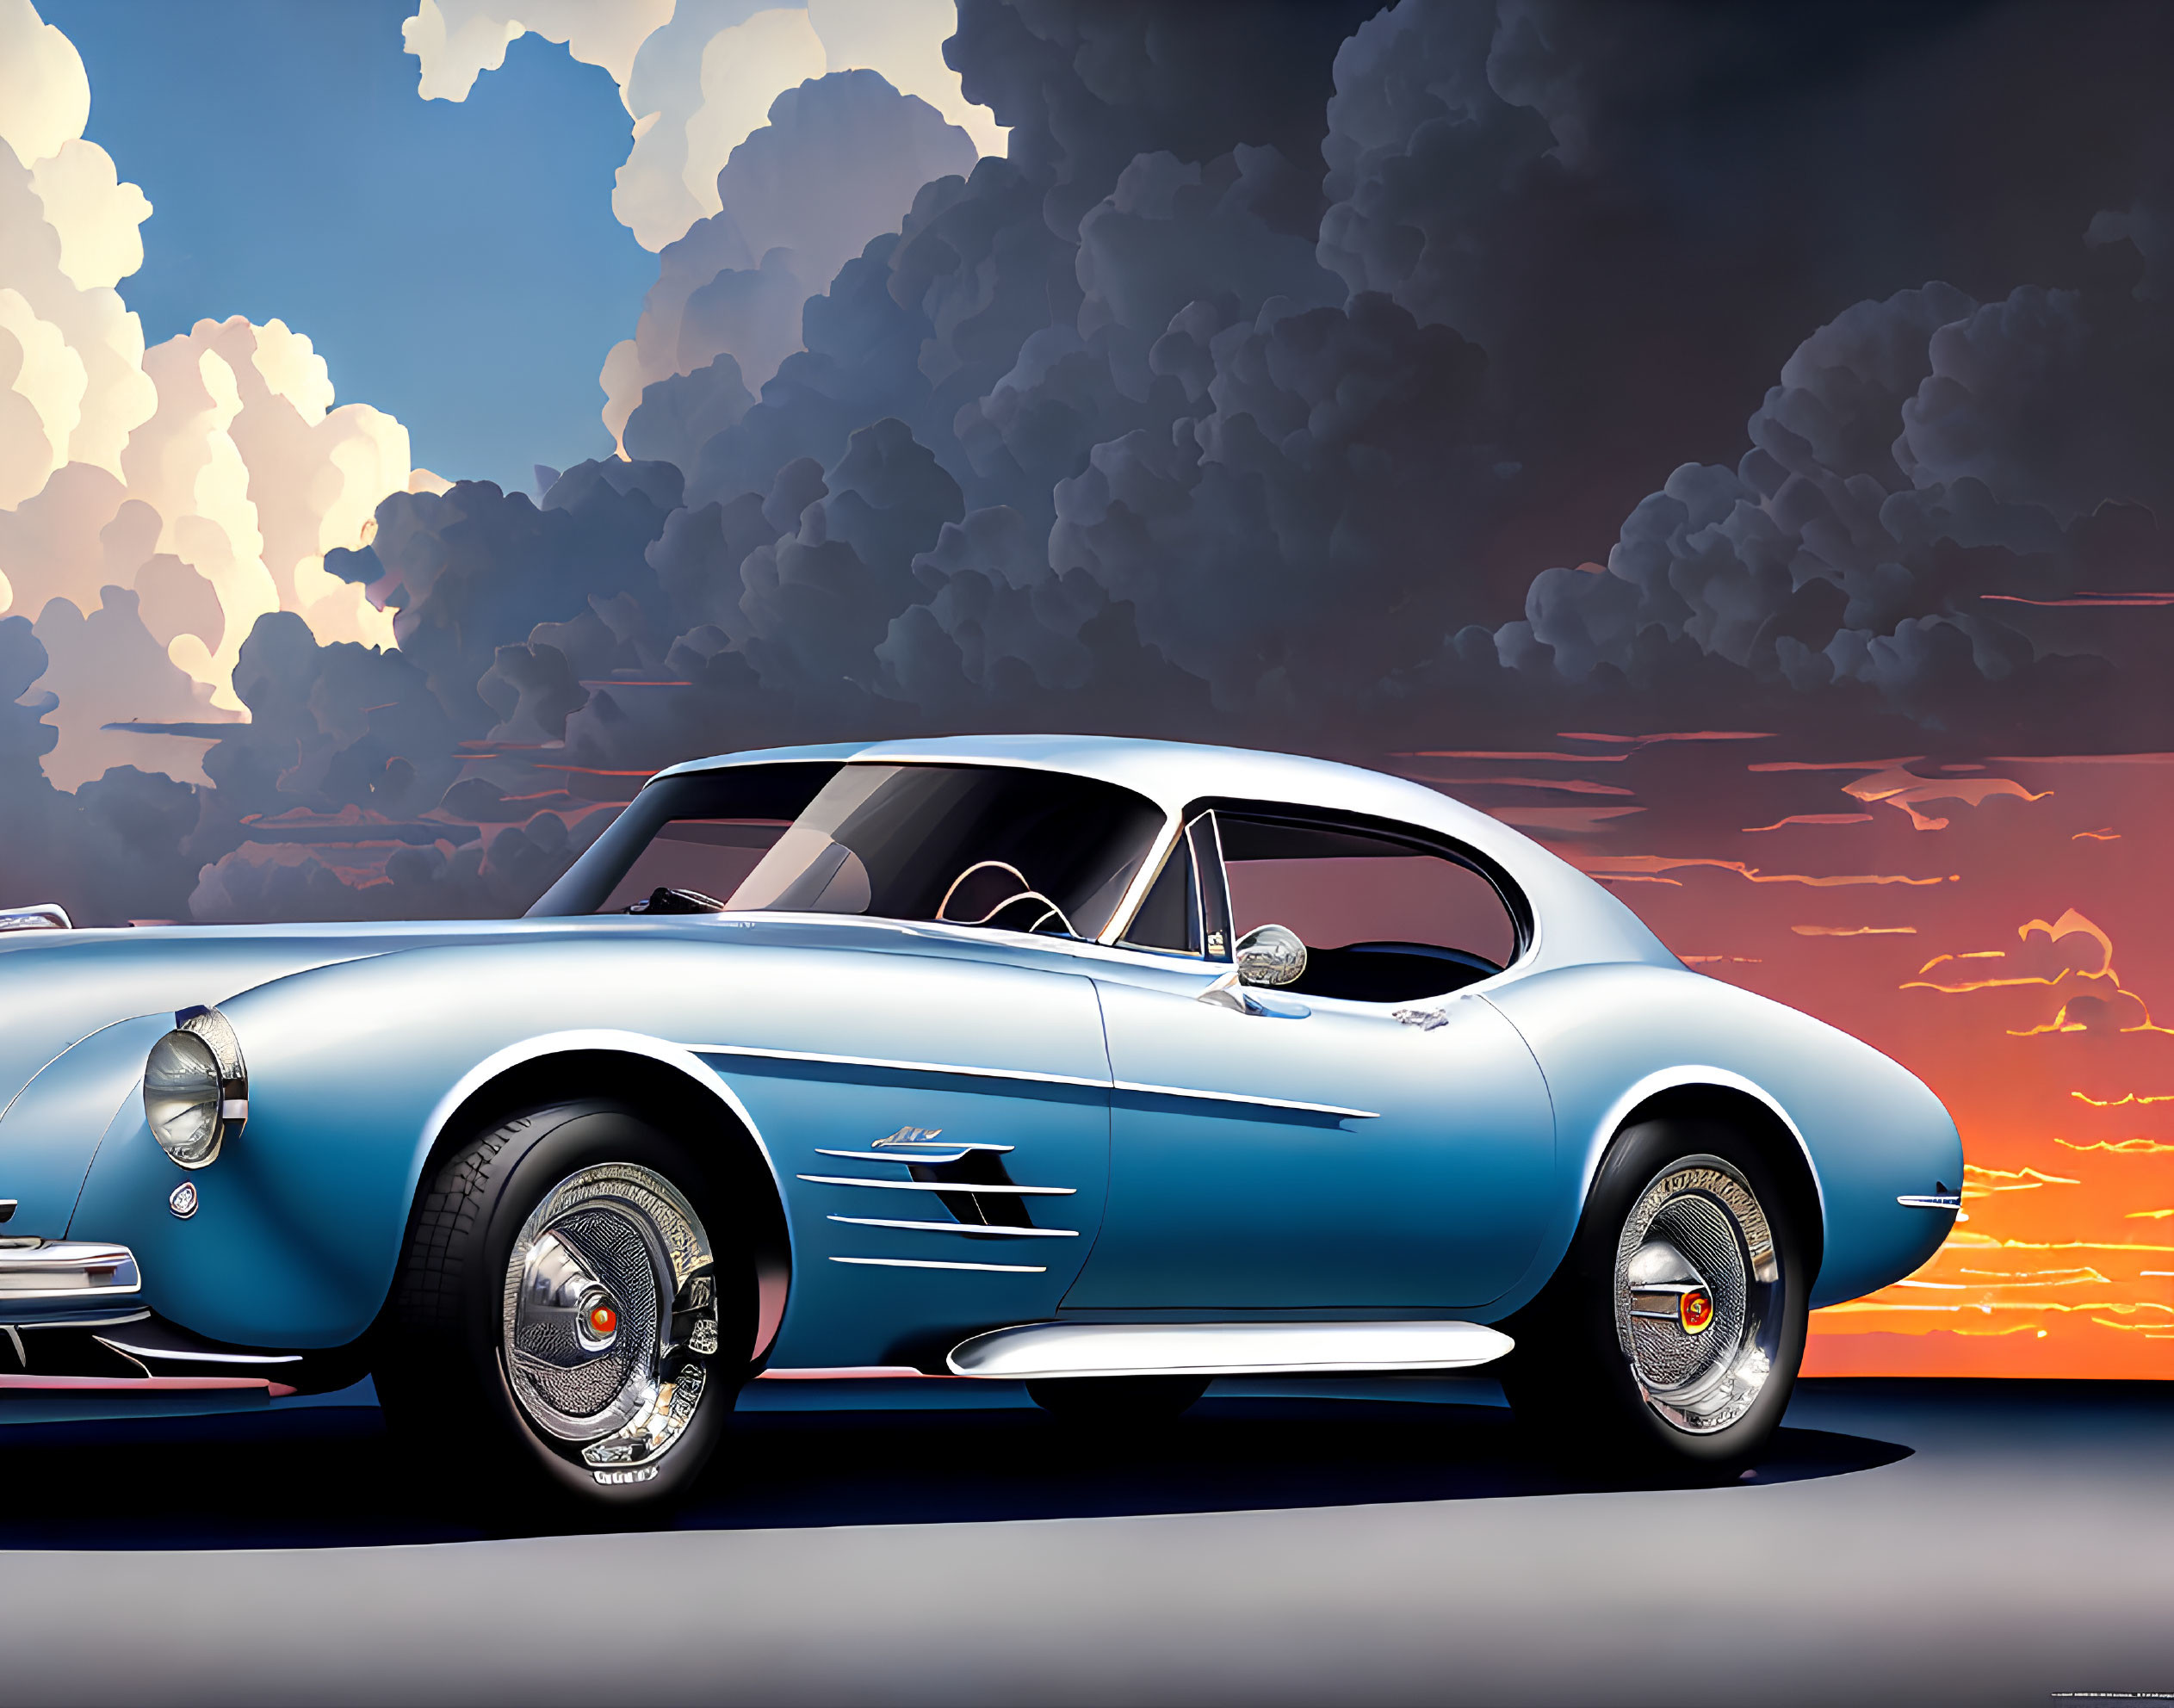 Classic Blue Sports Car with White Sidewall Tires in Sunset Scene